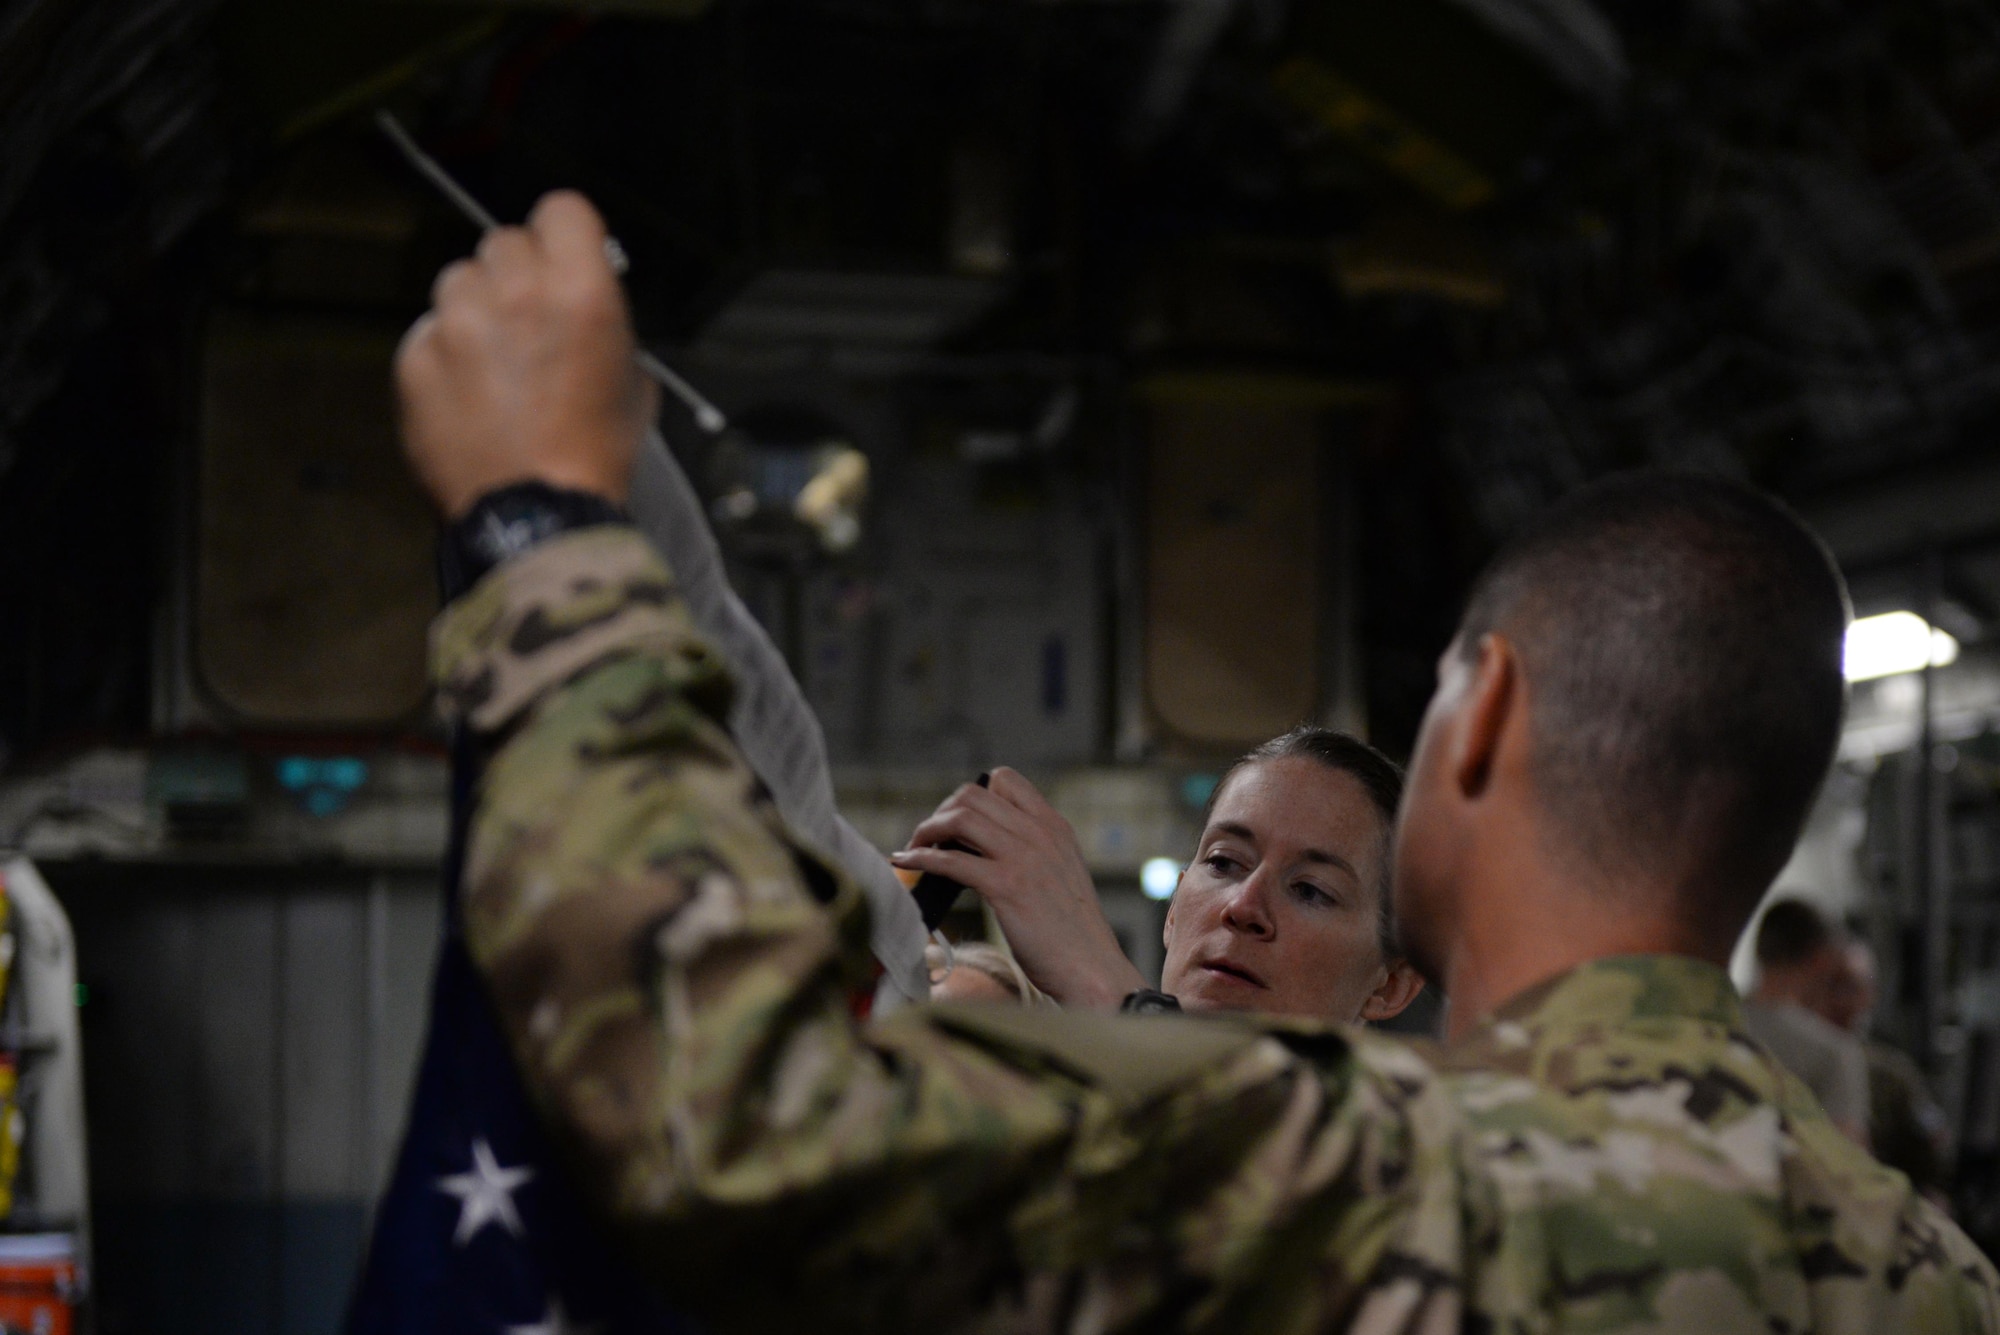 U.S. Air Force Senior Airman Margaret “Maggie” Mathewes, 455th Expeditionary Aeromedical Evacuation Squadron AE technician, and Tech. Sgt. Russell “Rusty” McLamb, left, 455th Expeditionary Aeromedical Evacuation Squadron AE technician deployed from the North Carolina Air National Guard’s 156th AES, hang a flag on a C-17 Globemaster III aircraft before an AE mission at Bagram Airfield, Afghanistan, Aug. 9, 2015.  The 455th EAES Airmen are charged with the responsibility of evacuating the sick and wounded from Central Command to higher echelons of medical care. (U.S. Air Force photo by Maj. Tony Wickman/Released)